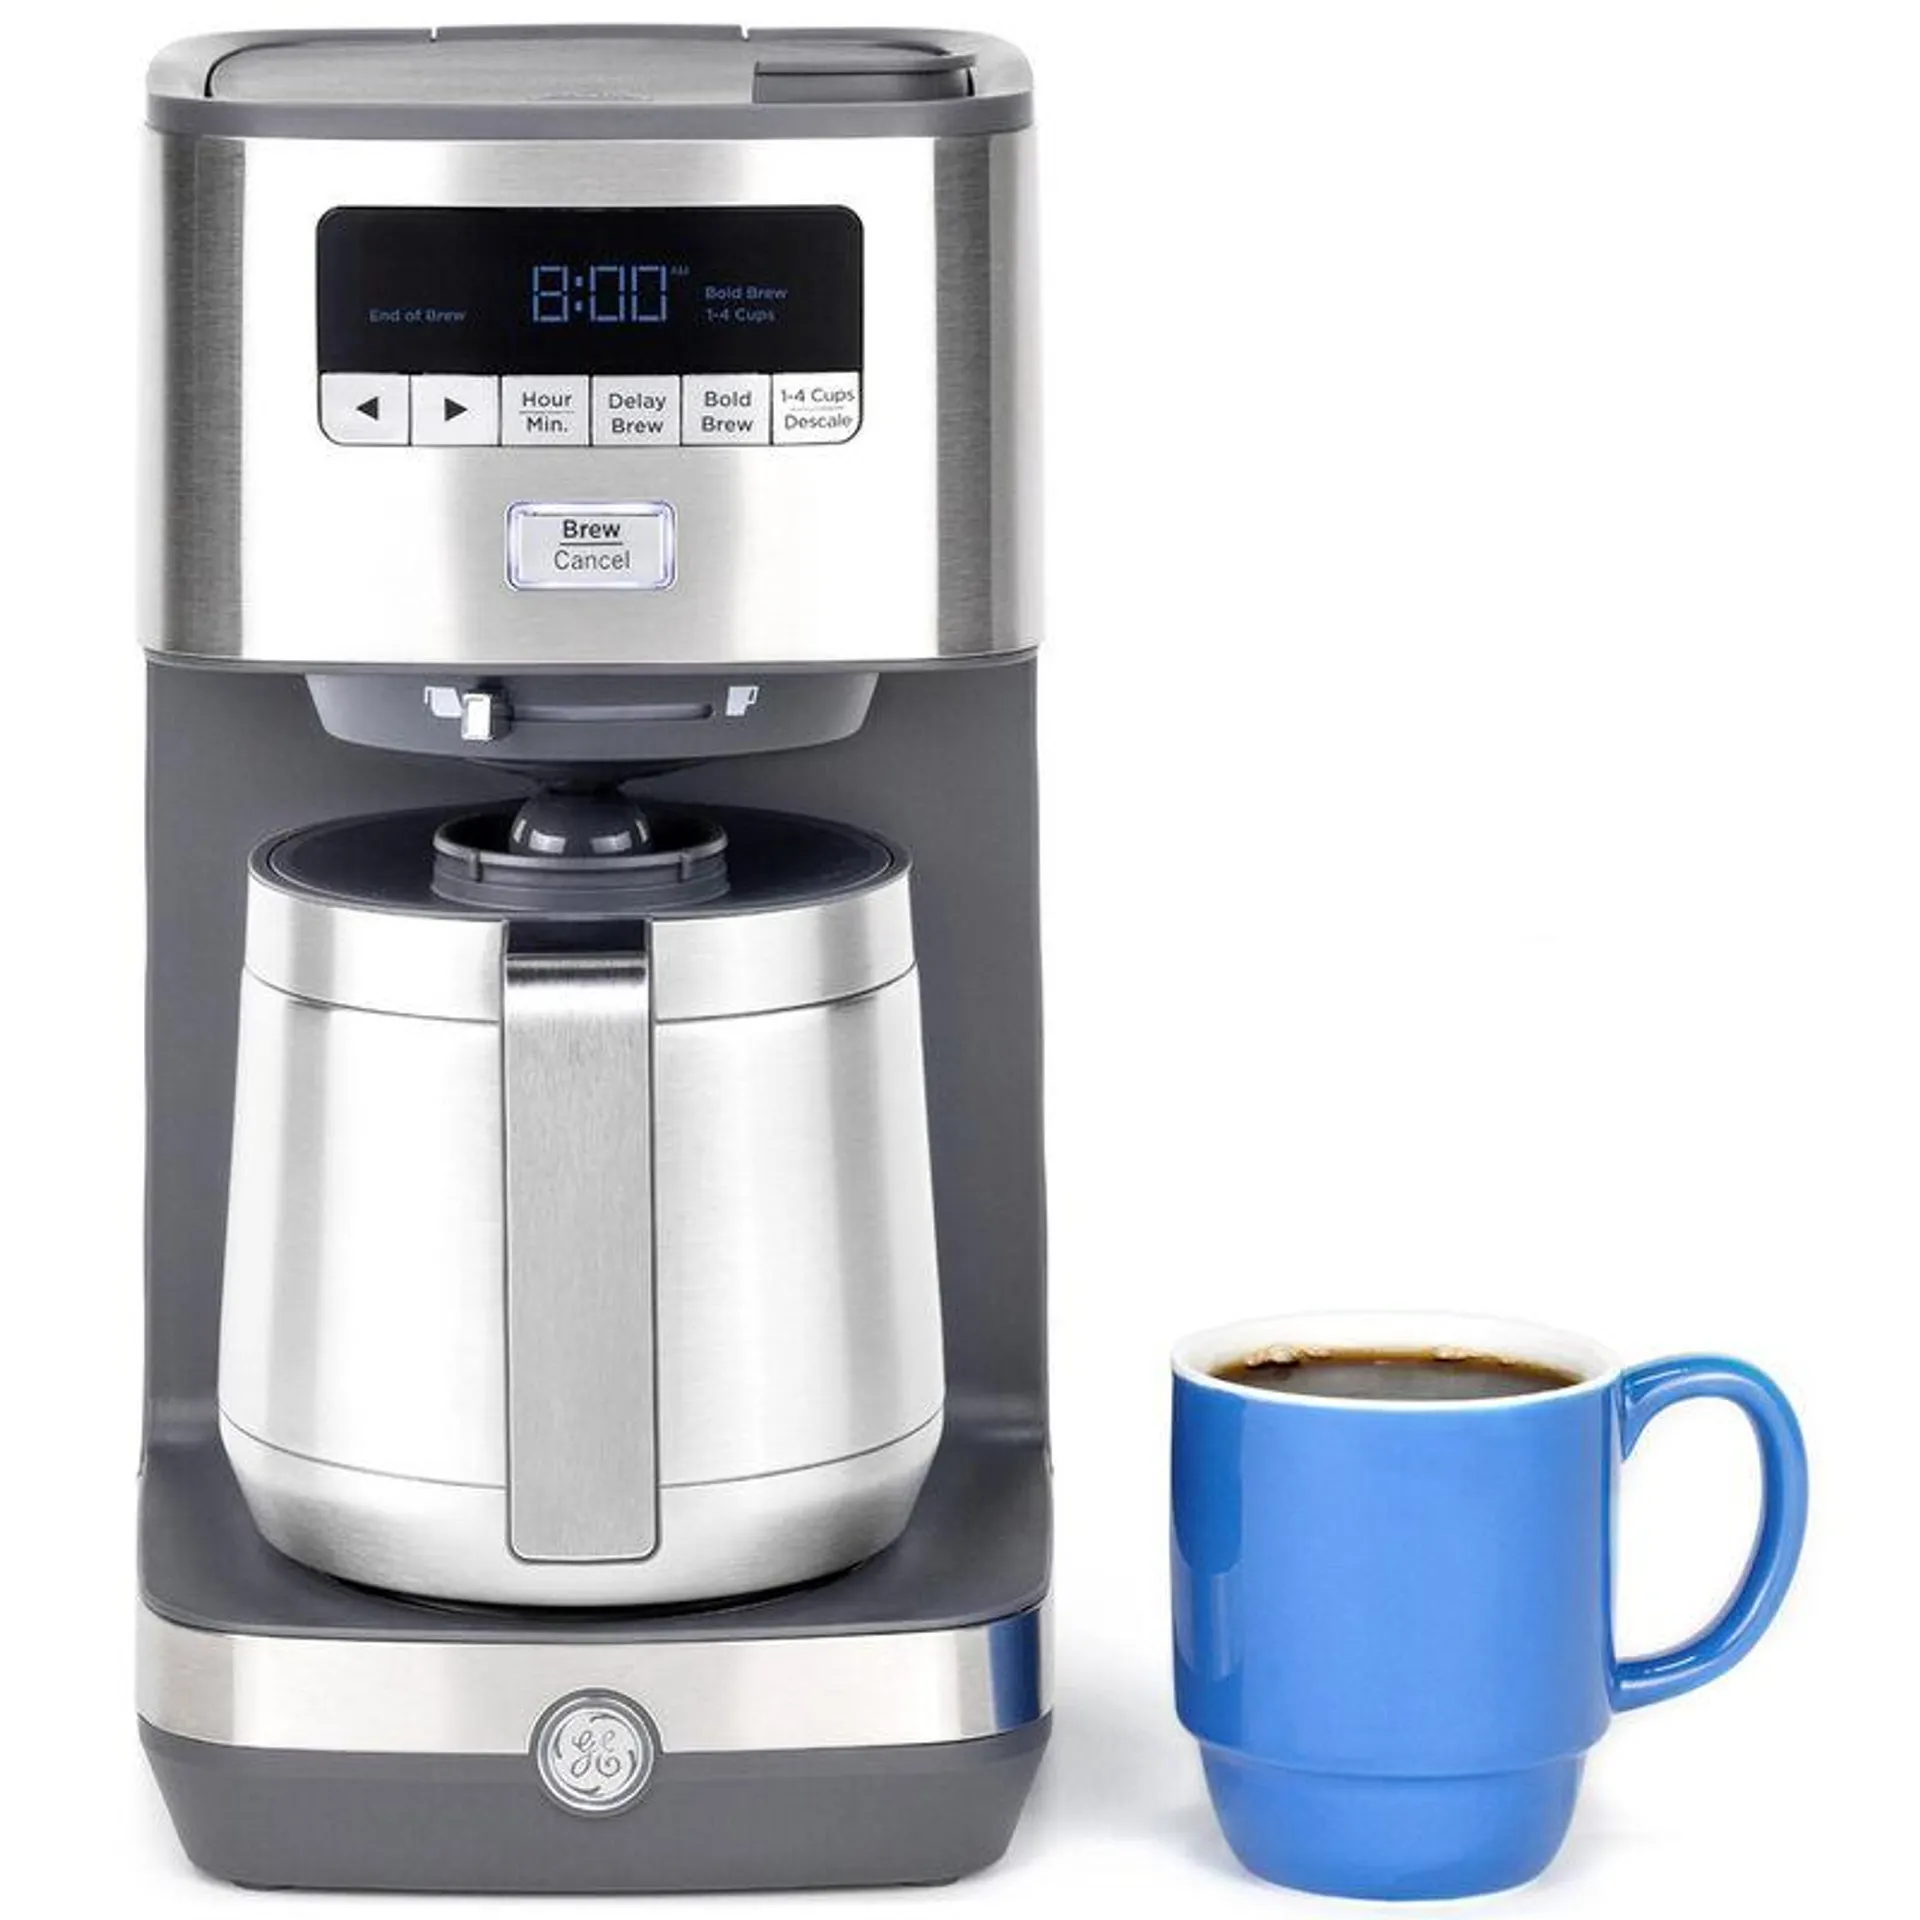 GE 10-Cup Drip Coffee Maker with Single Serve - Stainless Steel